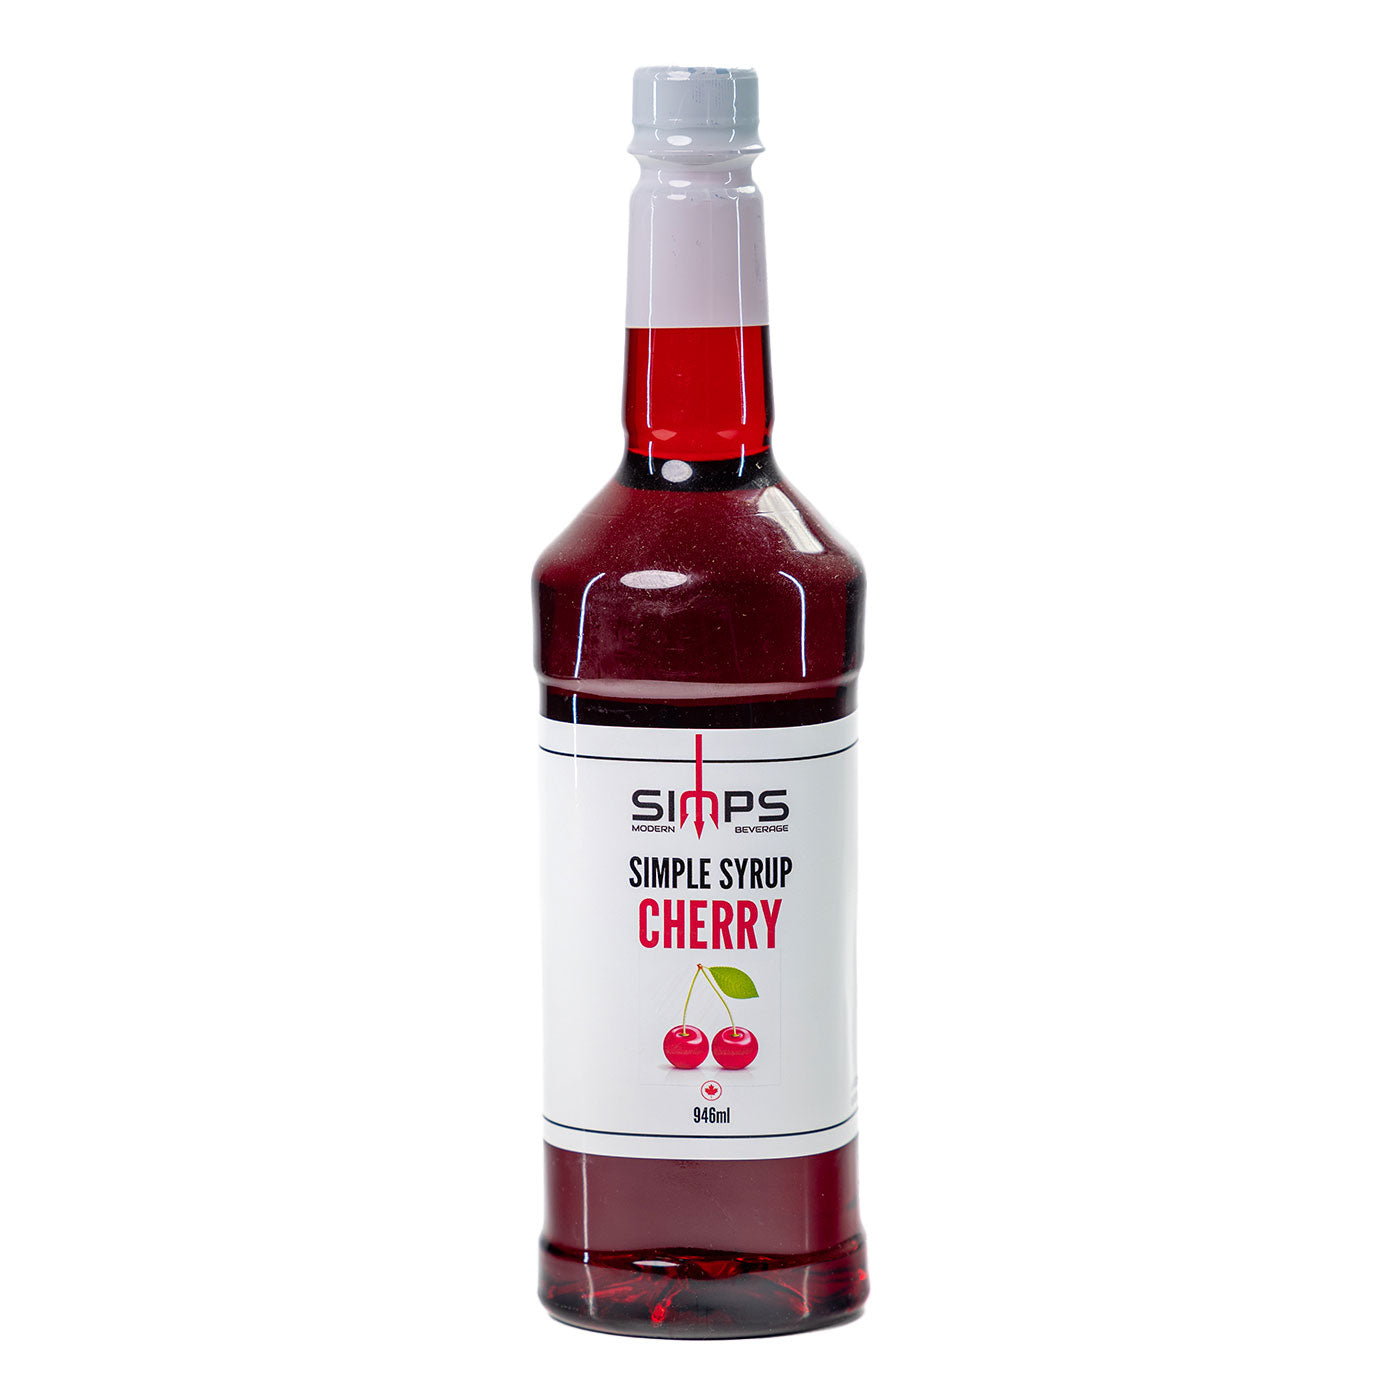 Simps Cherry Syrup